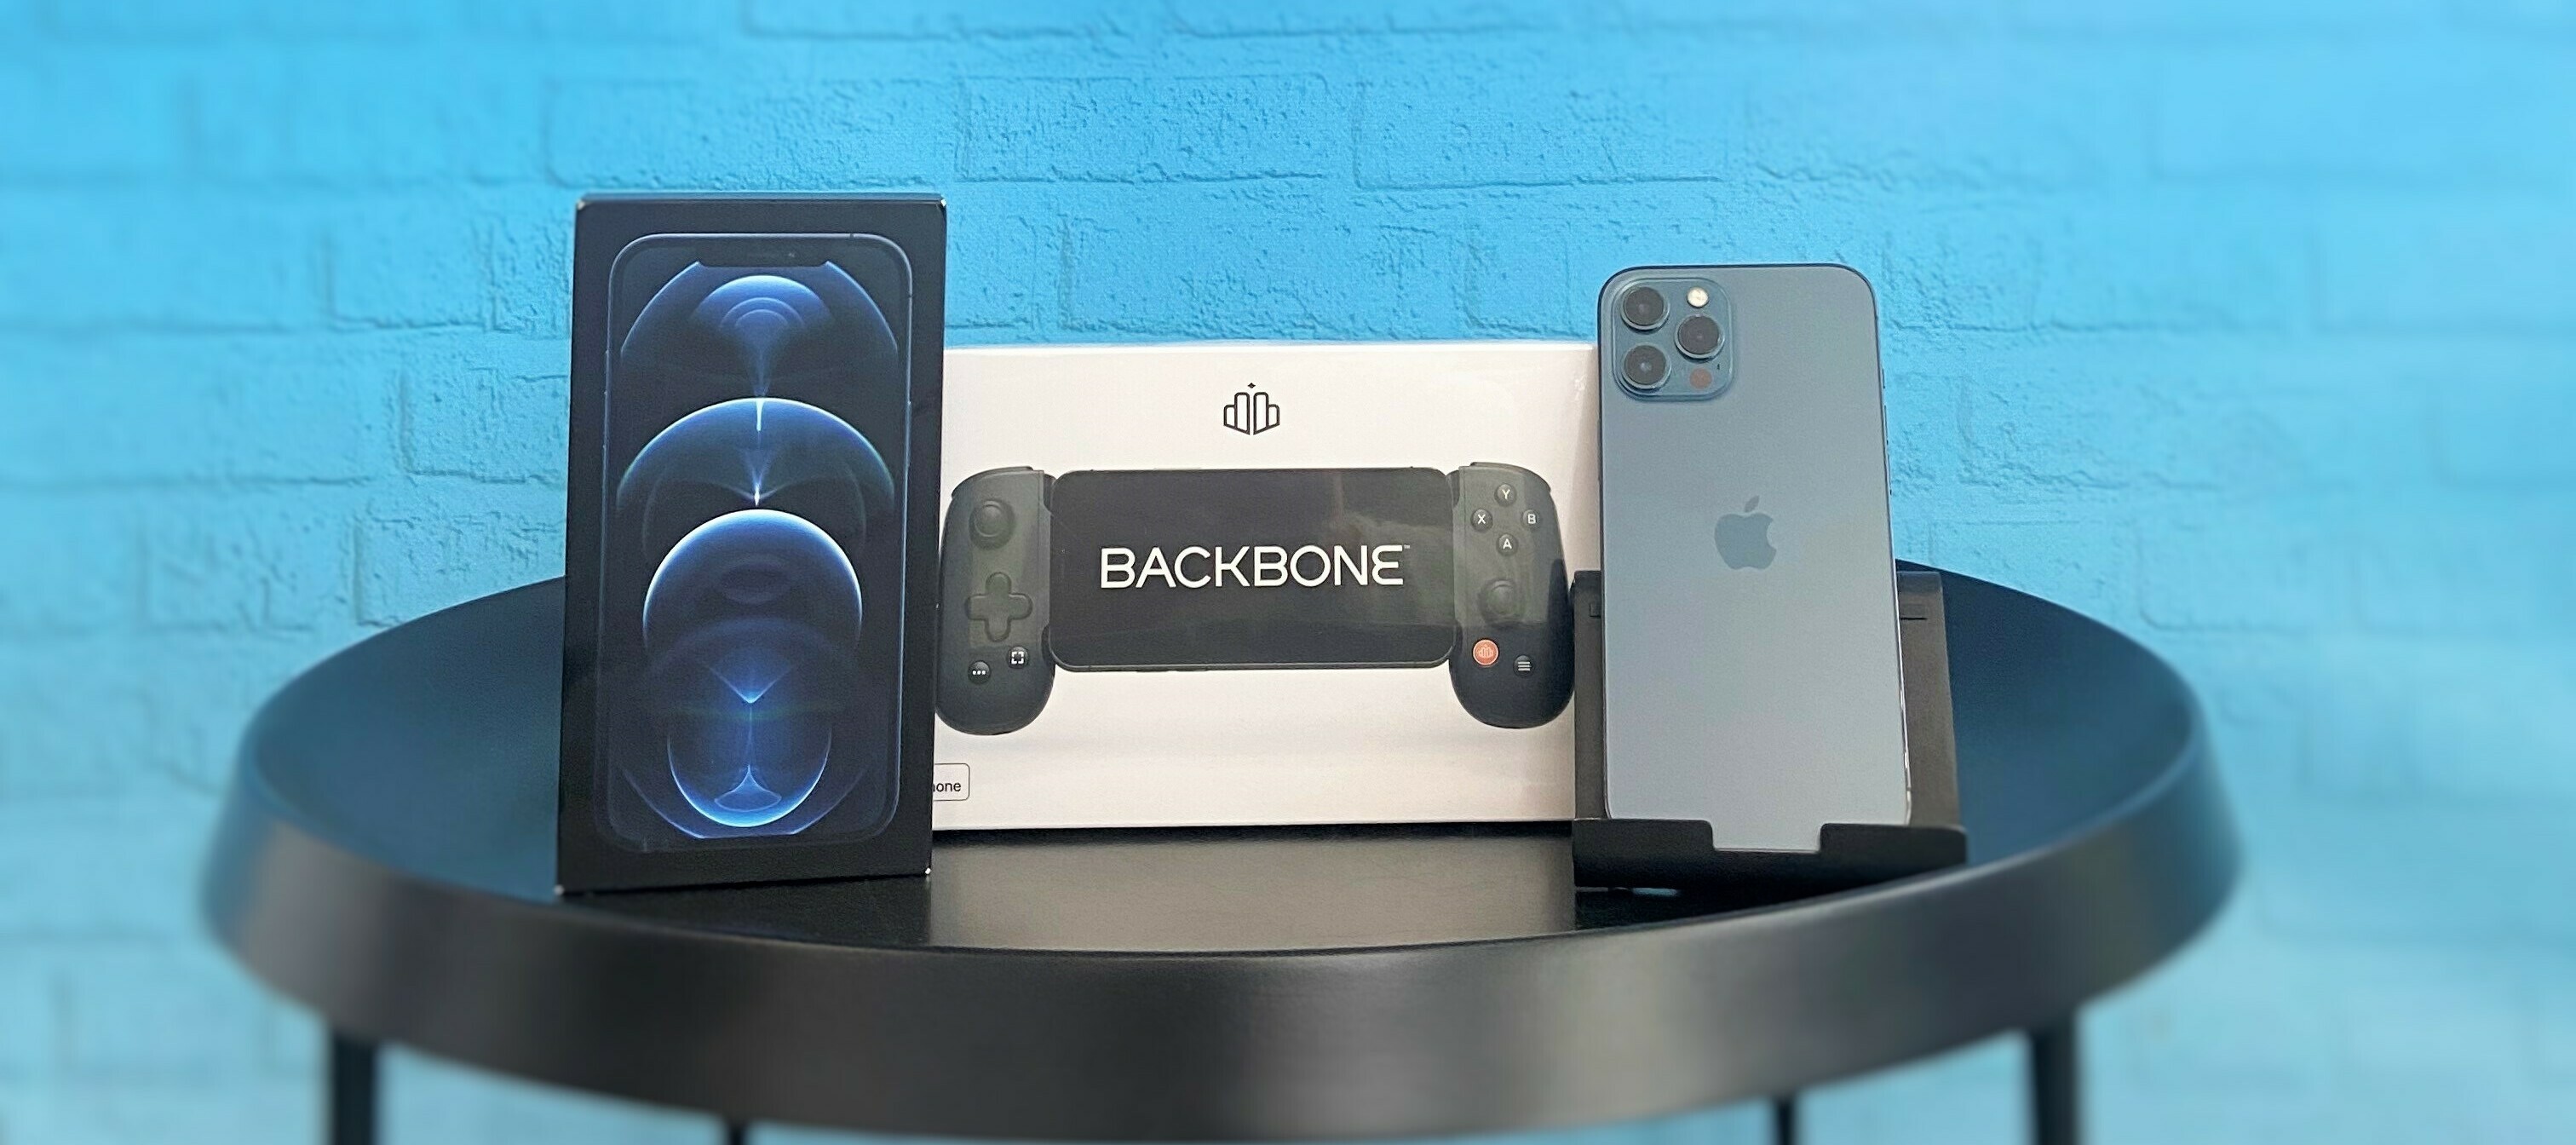 Apple iPhone 12 Pro Max & Backbone One Mobile Gaming Controller - Gaming Next-Level im Test!